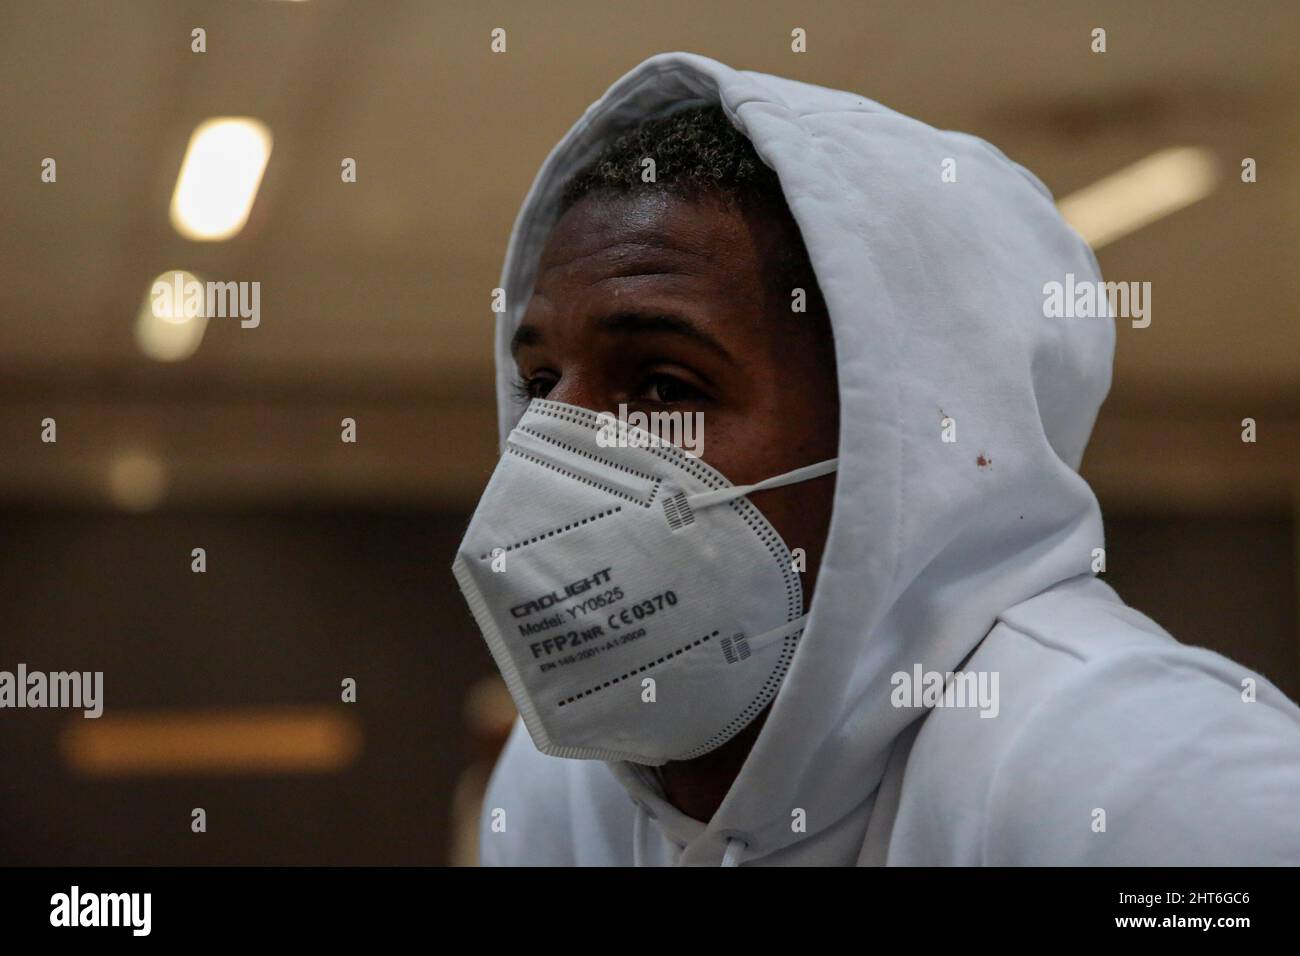 Sao Paulo, Brazil. 27th Feb, 2022. SP - Sao Paulo - 02/27/2022 - SAO PAULO, BRAZILIAN PLAYERS ARRIVE FROM UKRAINE - Ukraine's Dnipro forward Fabricio Rodrigues da Silva, the 22-year-old Bill, ex-Flamengo, during his early morning arrival in Brazil this Sunday (27). He and two other teammates traveled around 1000 km to reach the Romanian border to escape the war. Photo: Suamy Beydoun/AGIF/Sipa USA Credit: Sipa USA/Alamy Live News Stock Photo